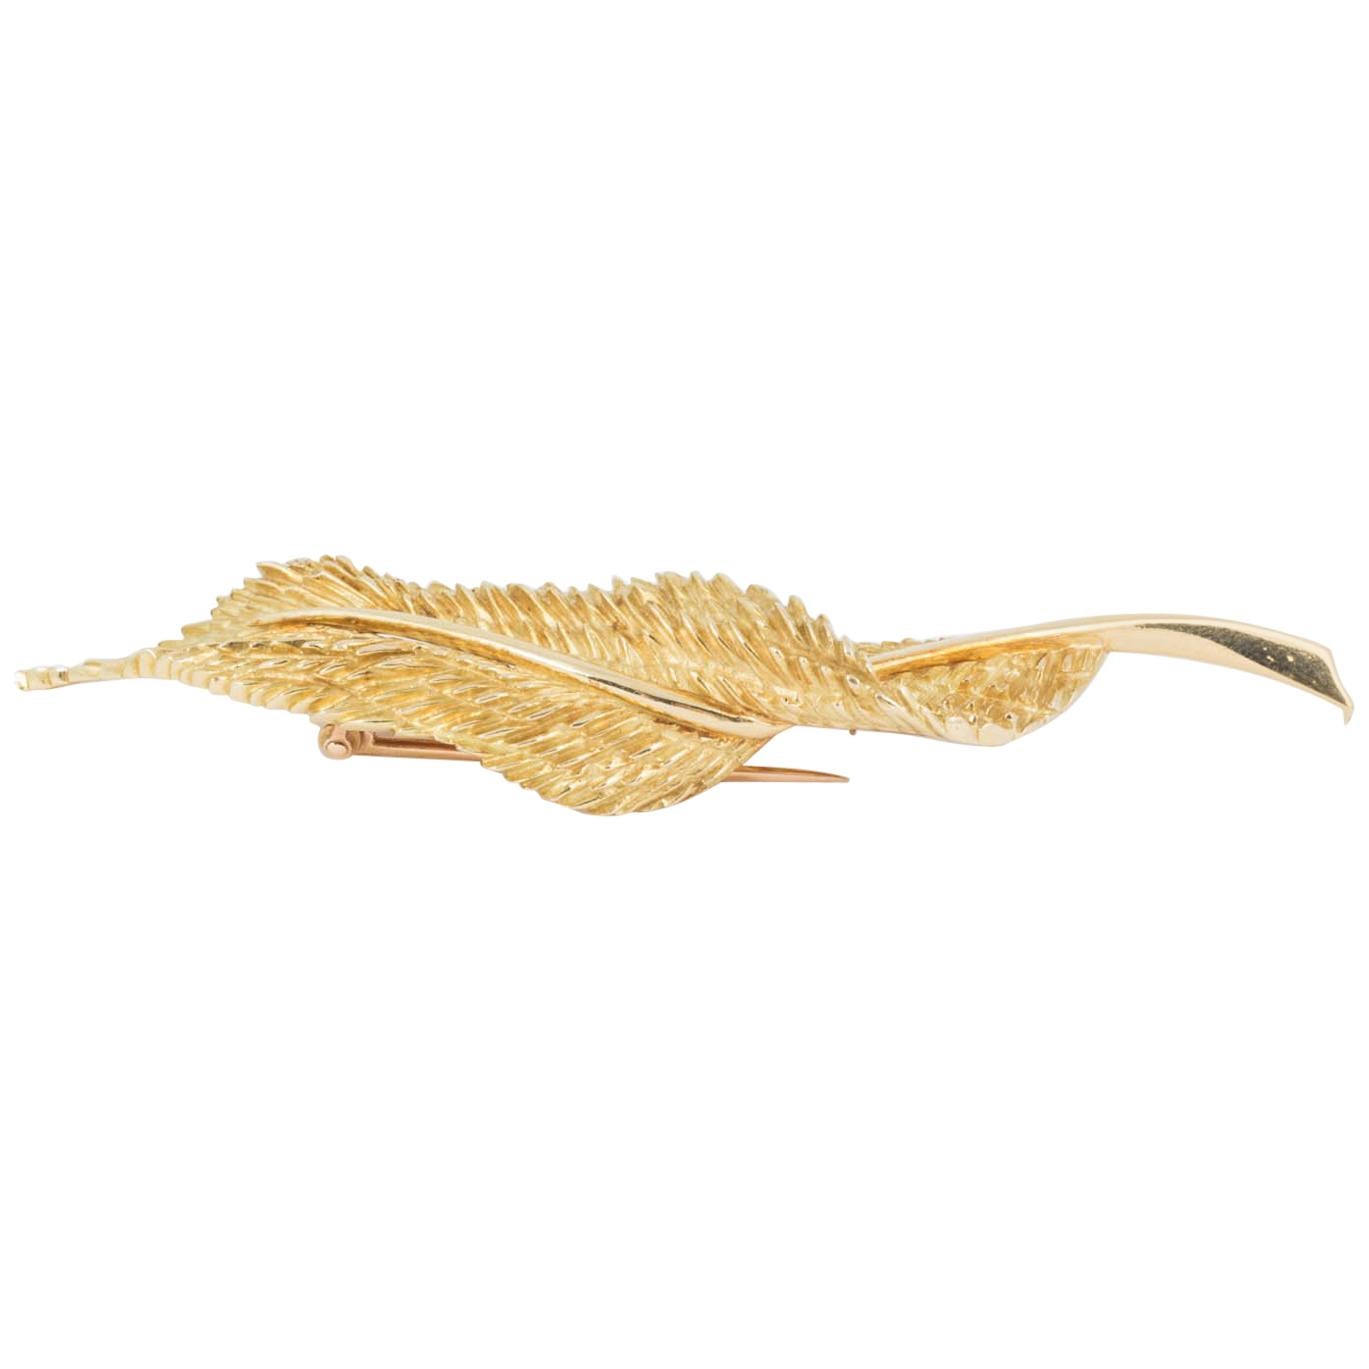 Hermes of Paris Brooch of a Curling Leaf in 18 Karat Gold, French circa 1950 For Sale